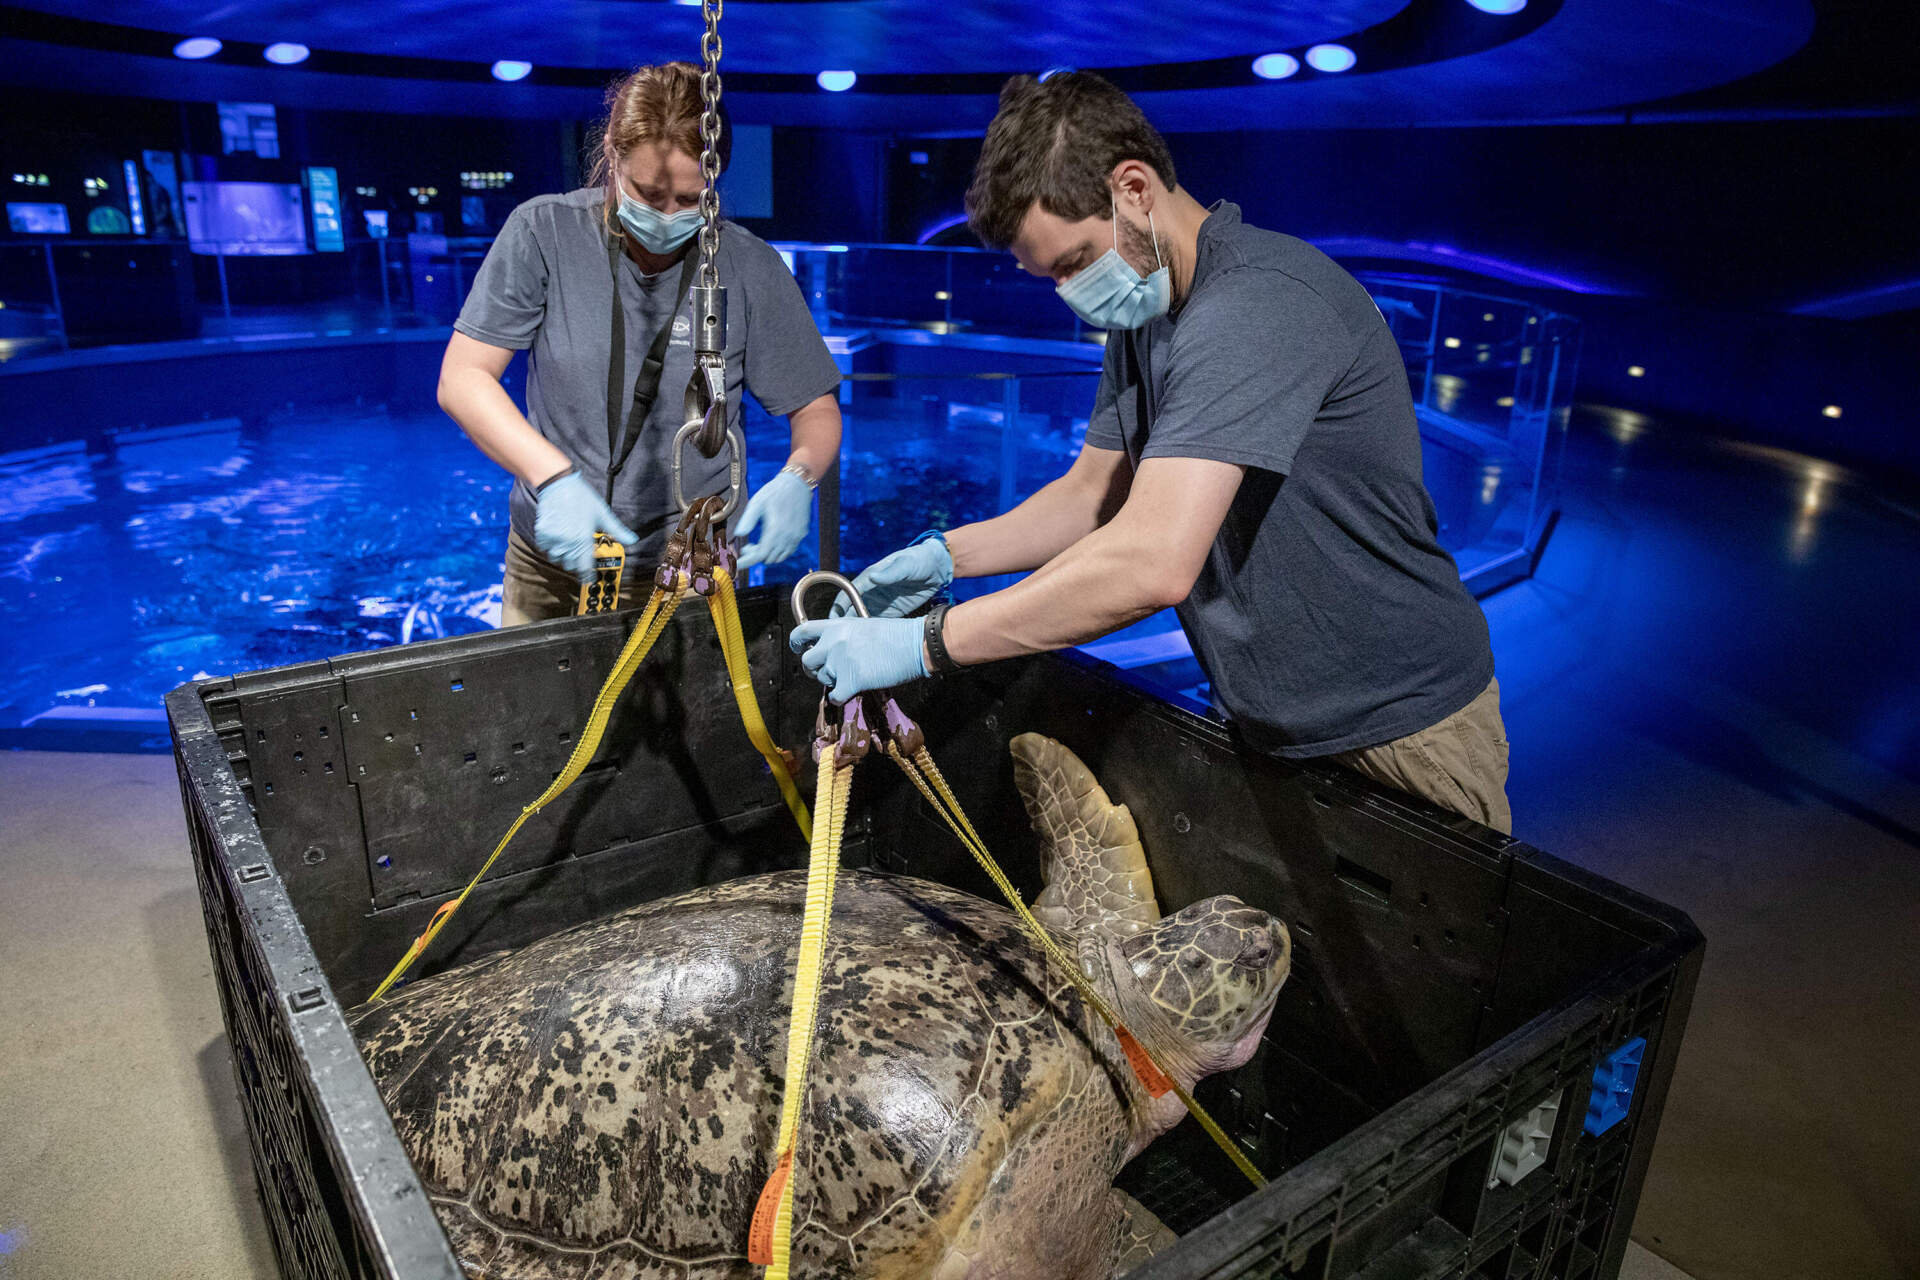 After a regular medical examination, aquarium staff gently attach Myrtle's crate to a winch to lower her back into the tank. (Robin Lubbock/WBUR)